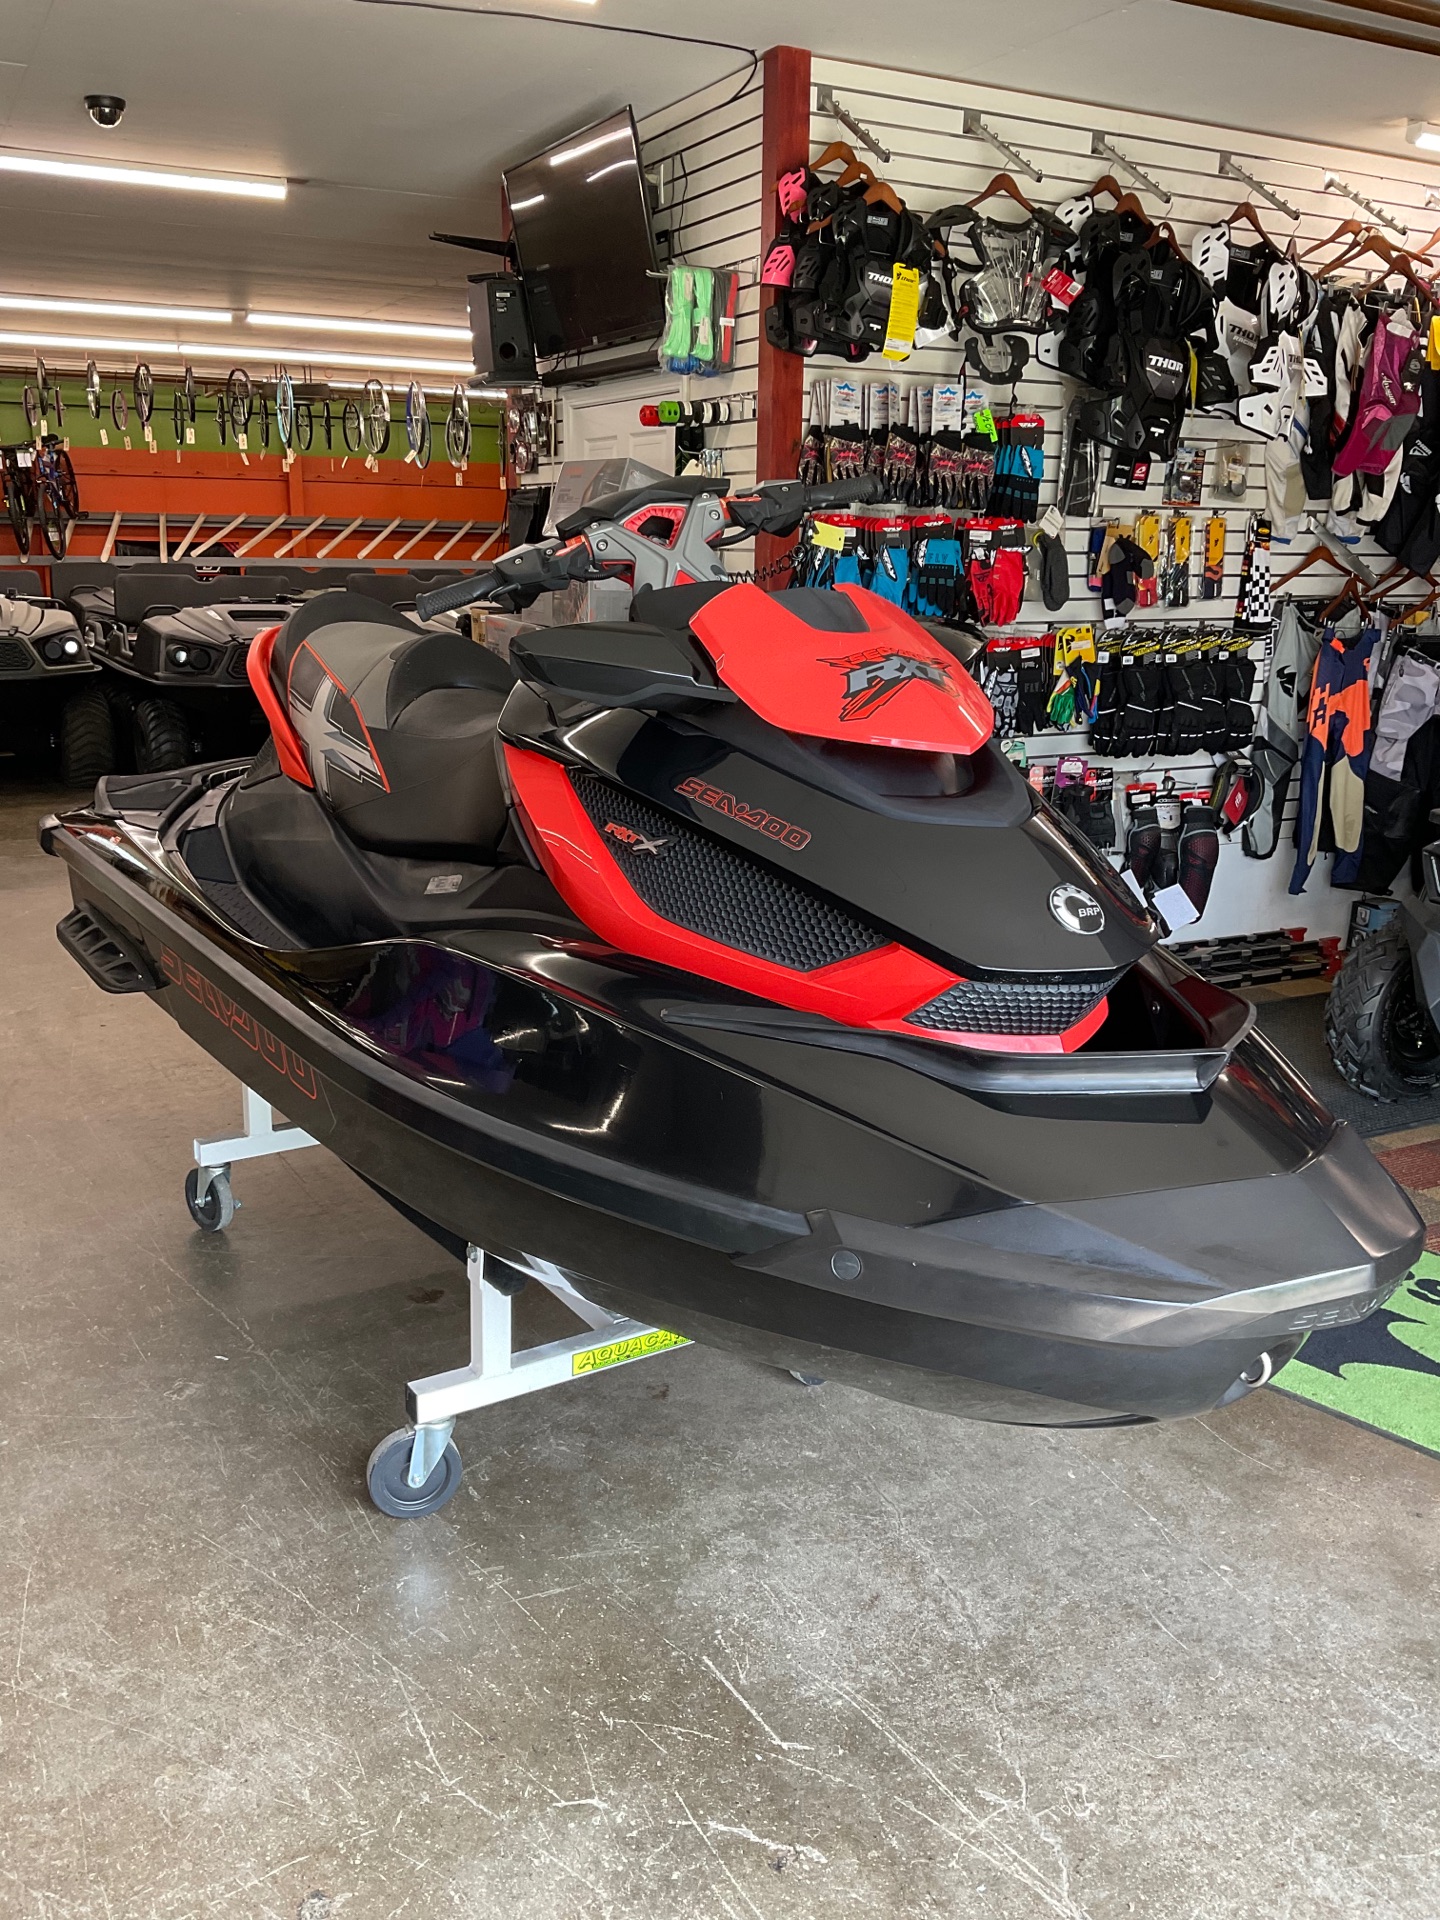 2011 Sea-Doo RXT AS 260 in Howell, Michigan - Photo 6